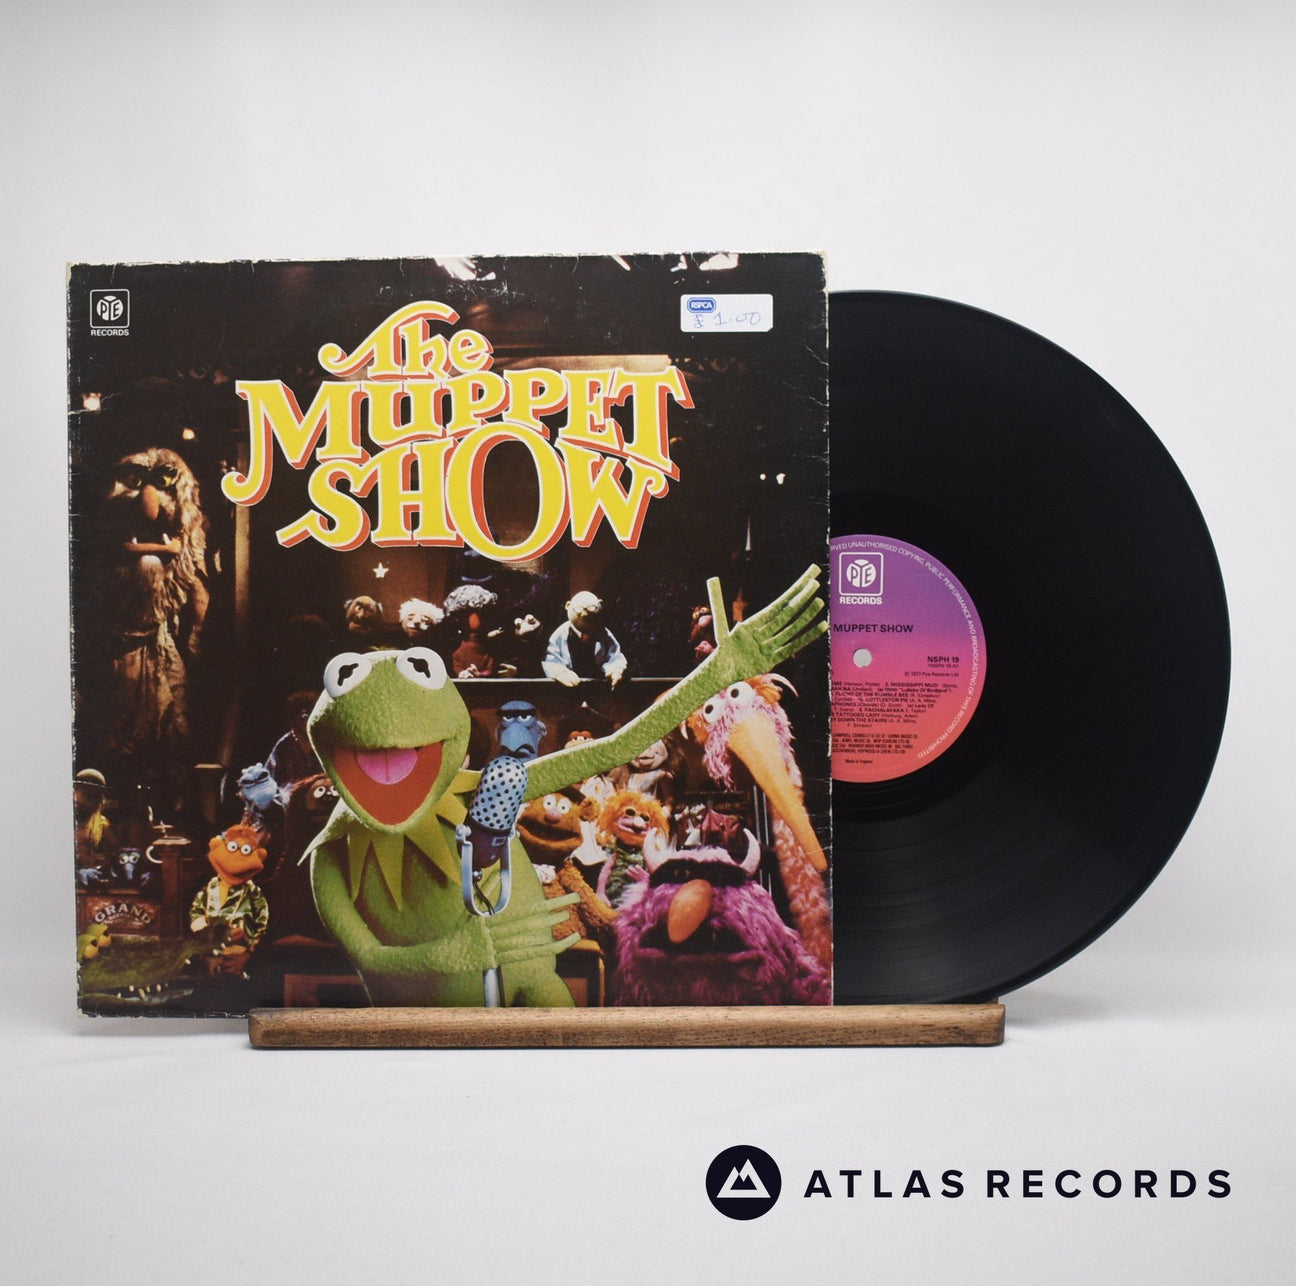 The Muppets The Muppet Show LP Vinyl Record - Front Cover & Record